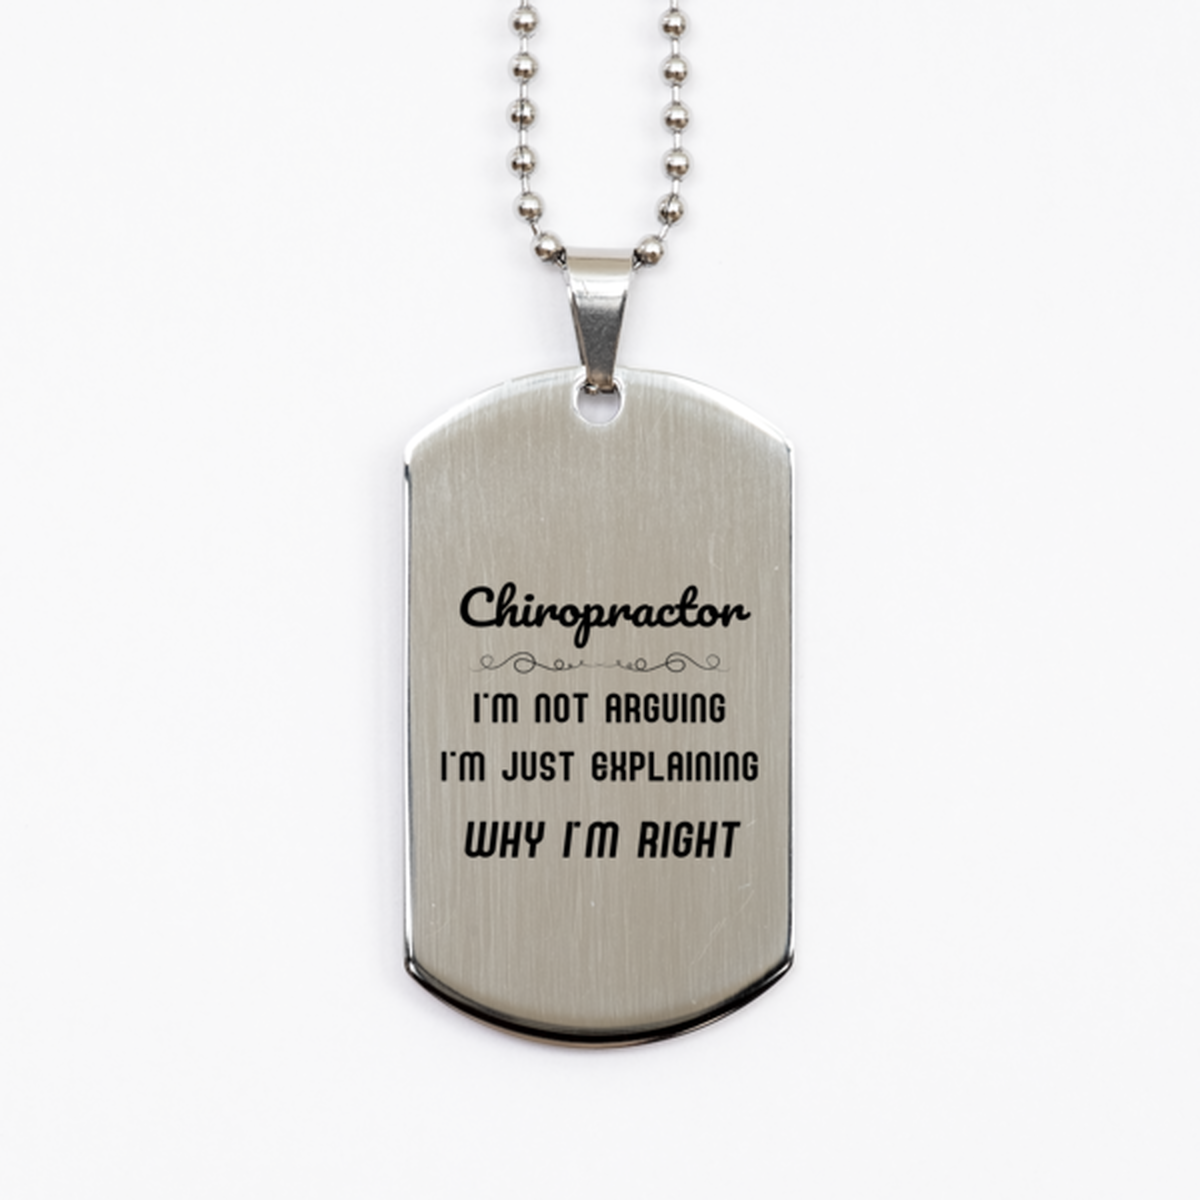 Chiropractor I'm not Arguing. I'm Just Explaining Why I'm RIGHT Silver Dog Tag, Funny Saying Quote Chiropractor Gifts For Chiropractor Graduation Birthday Christmas Gifts for Men Women Coworker